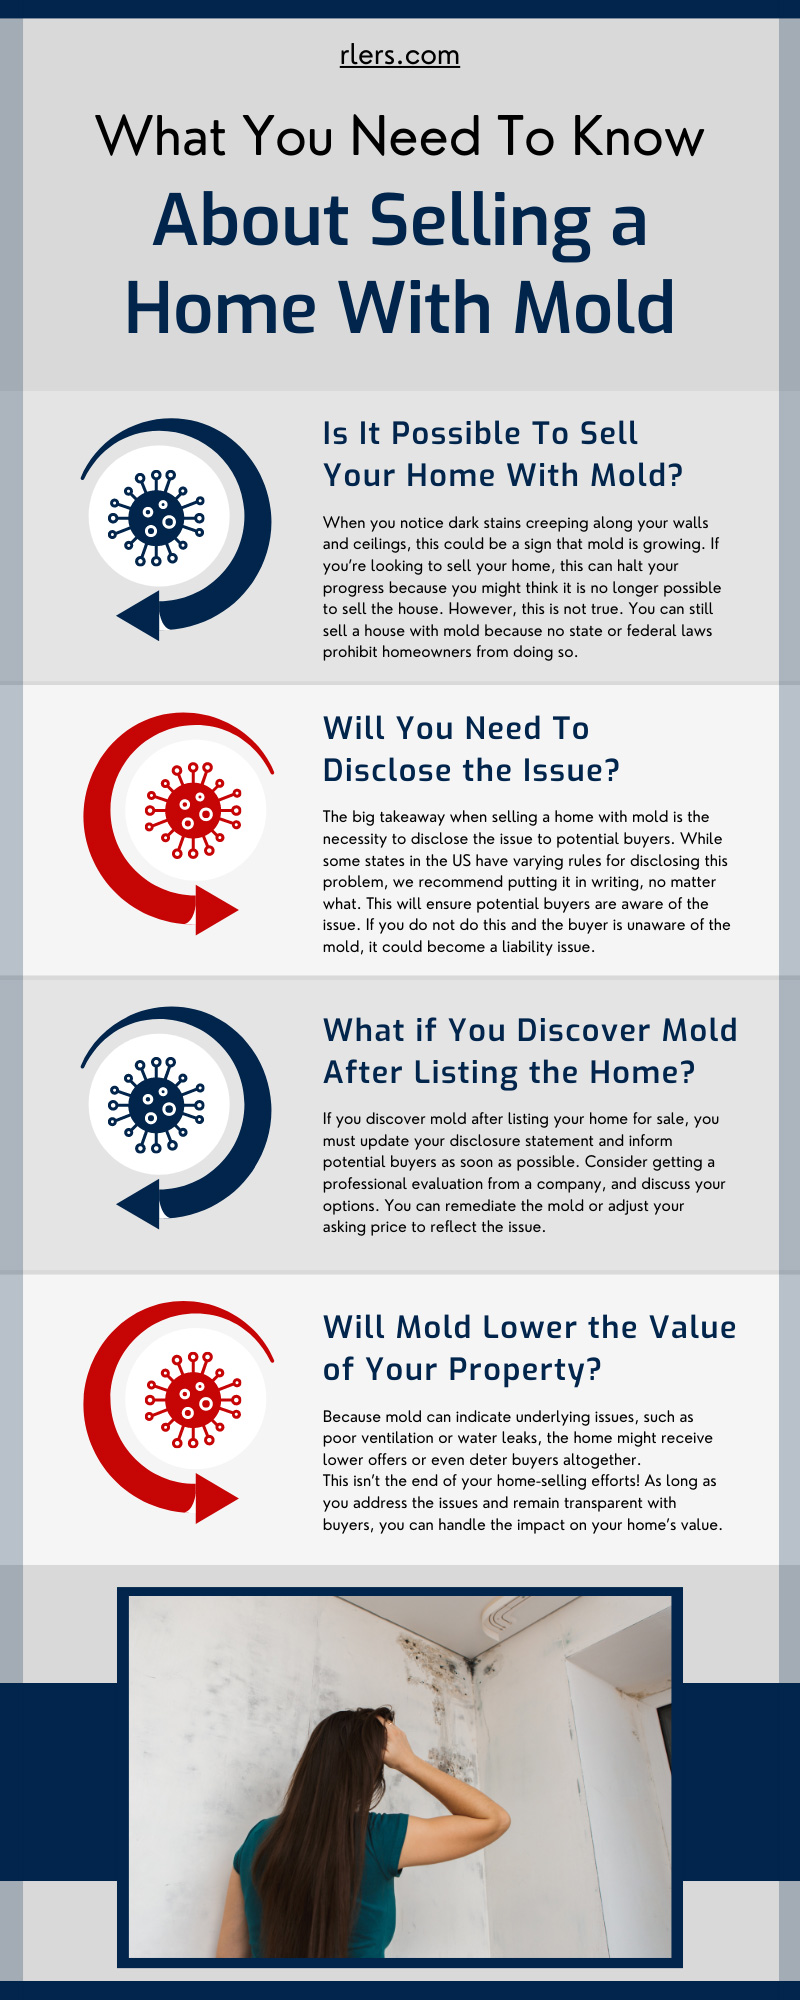 What You Need To Know About Selling a Home With Mold